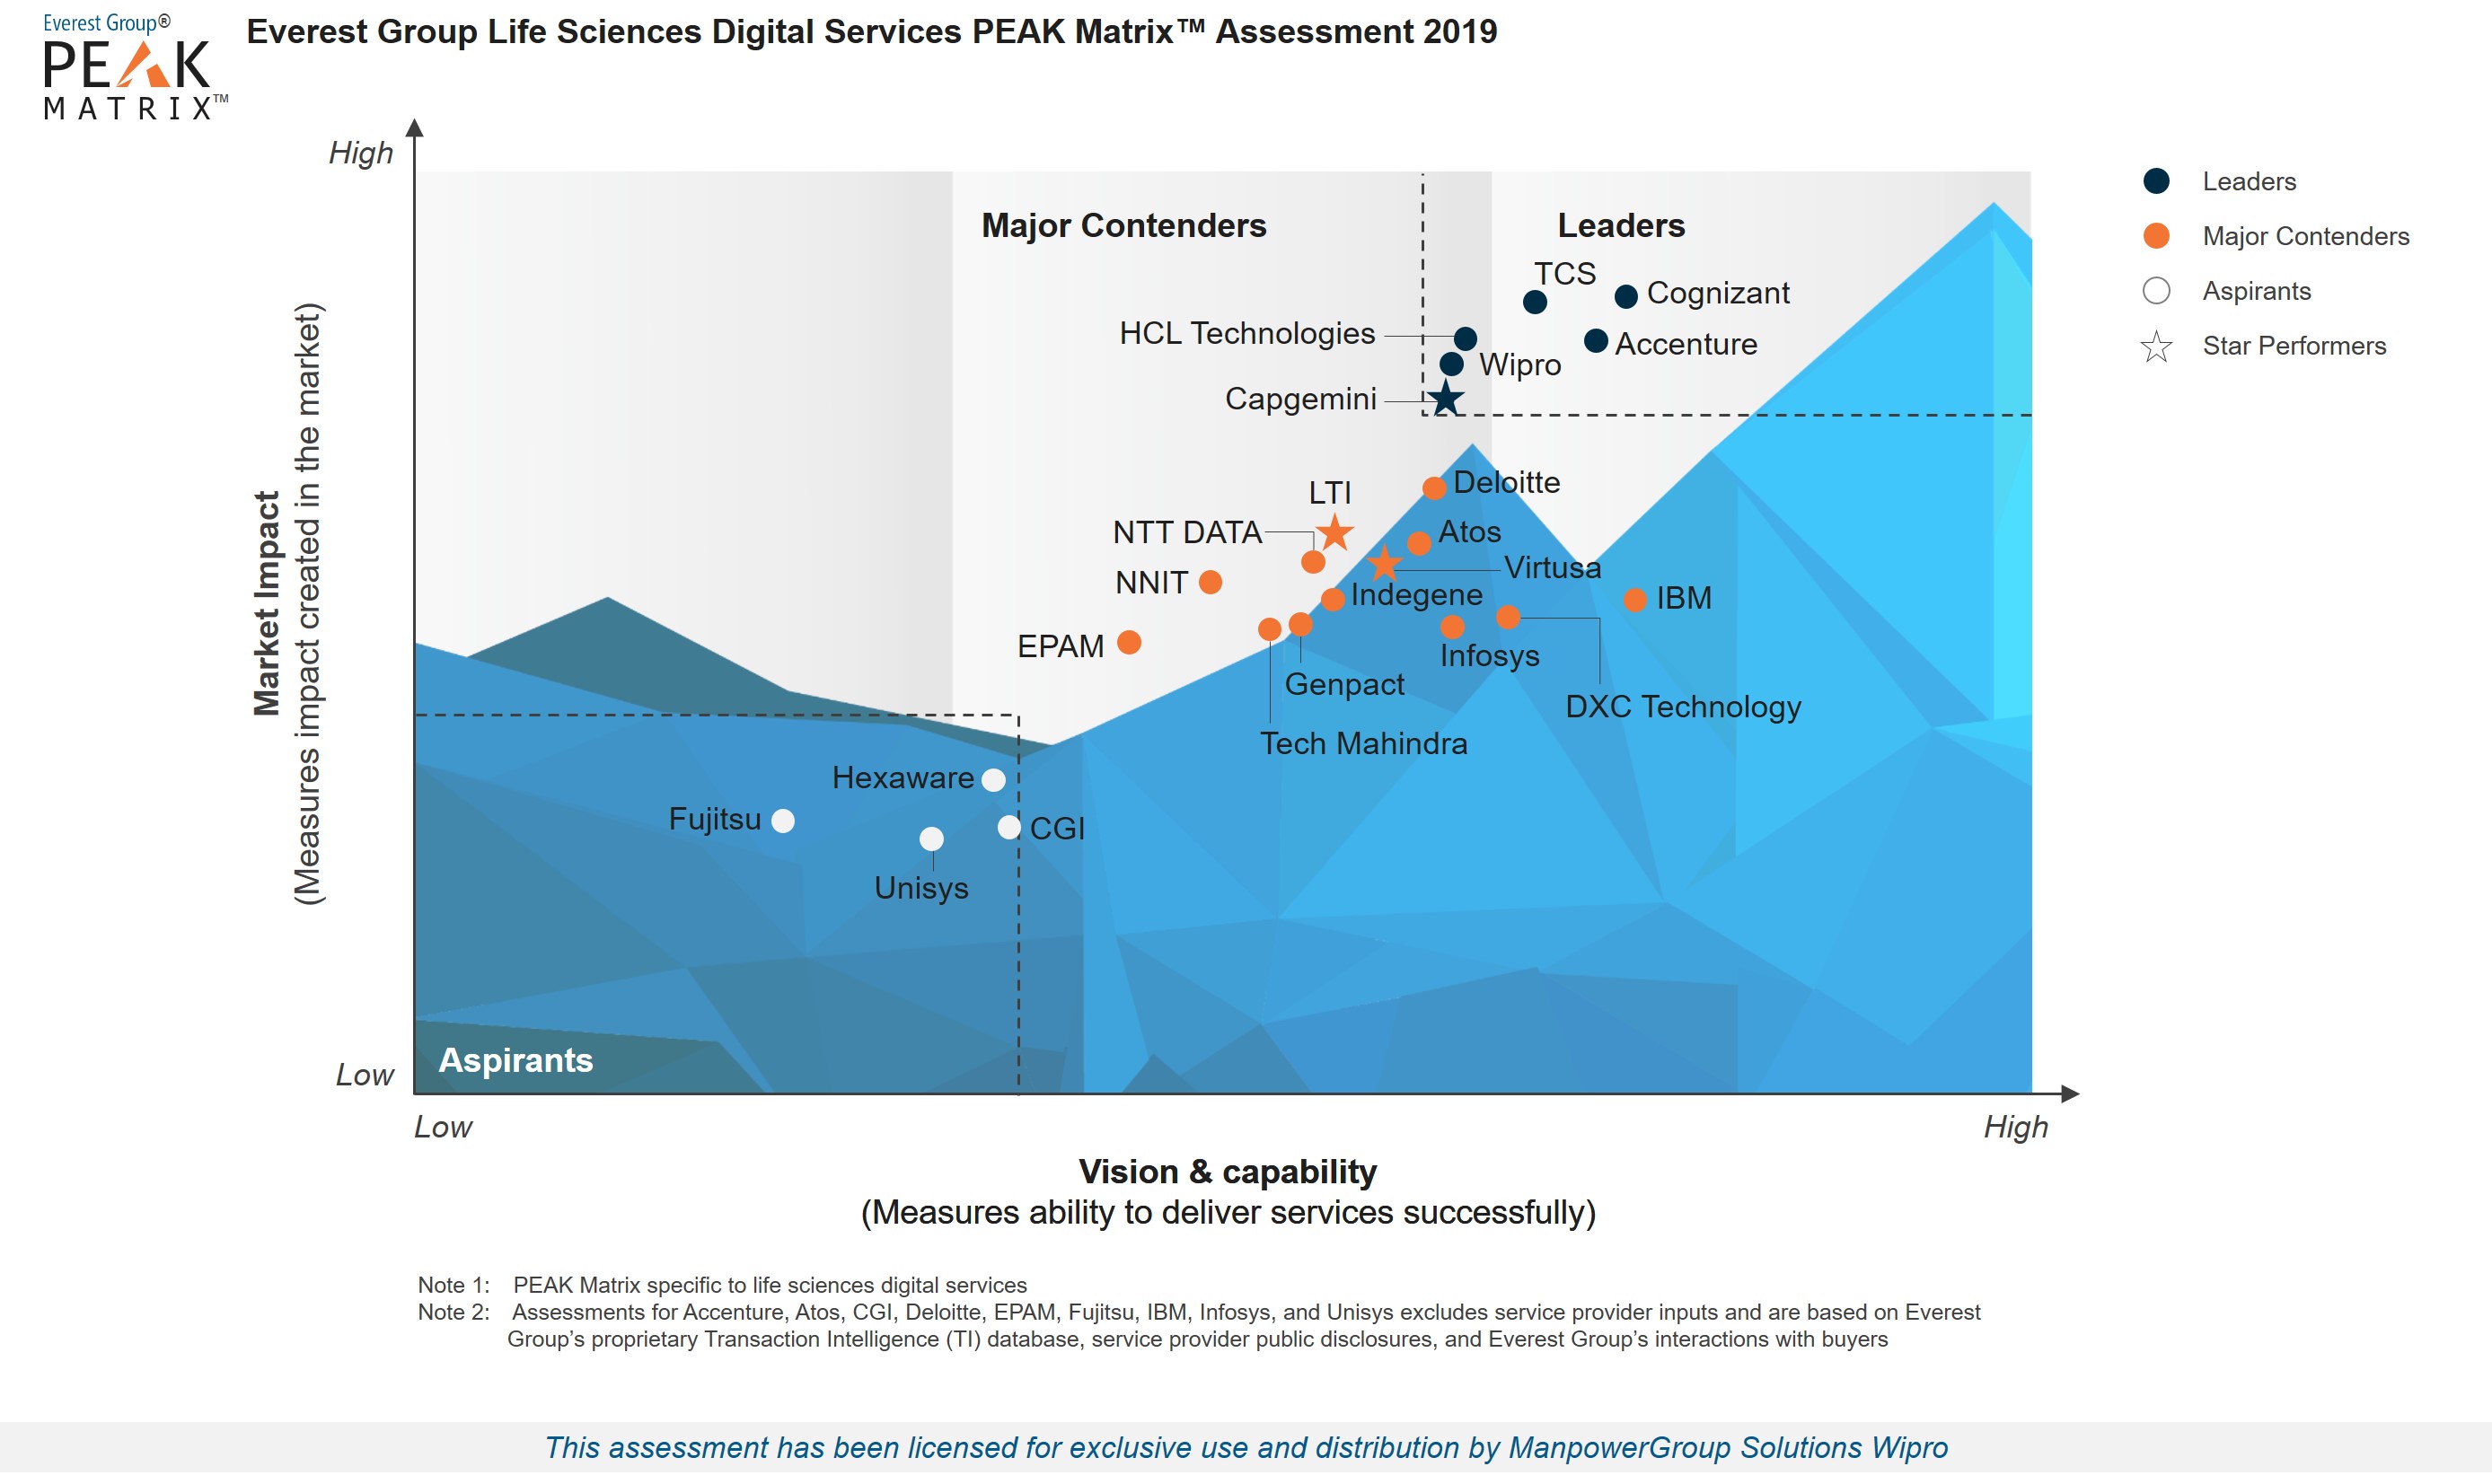 Wipro positioned as a Leader in Life Sciences Digital Services PEAK MatrixTM Assessment 2019